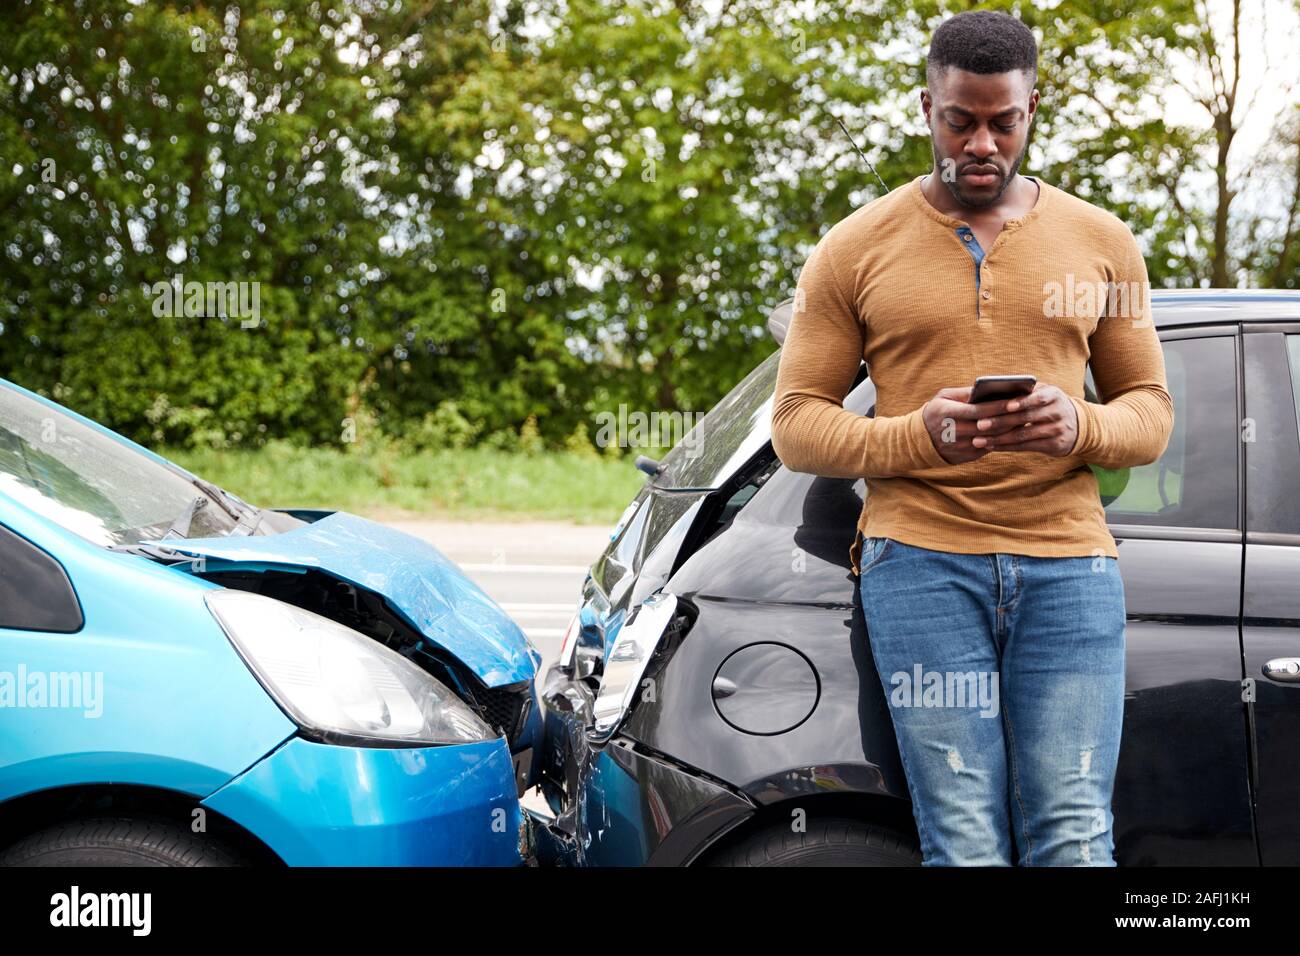 Male Motorist Involved In Car Accident Calling Insurance Company Or Recovery Service Stock Photo